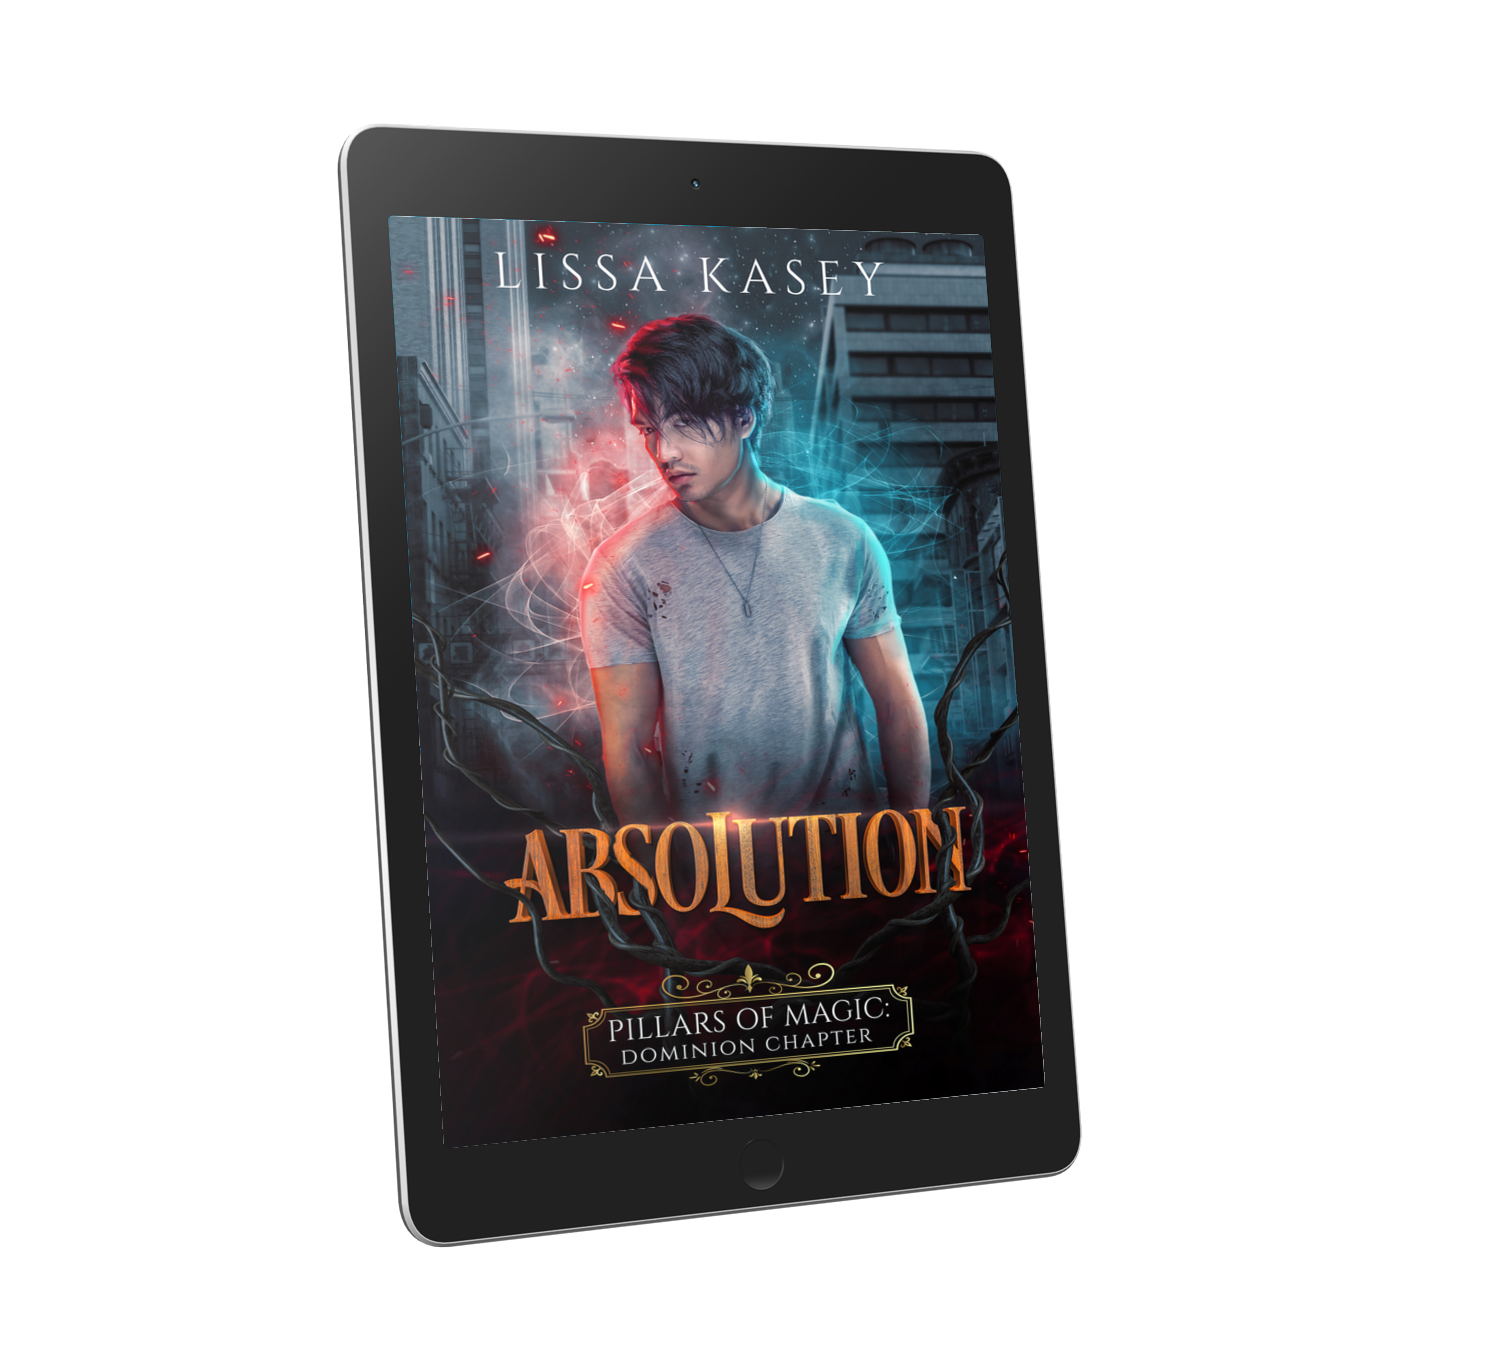 Absolution by Lissa Kasey Pillars of Magic: Dominion Chapter Book five